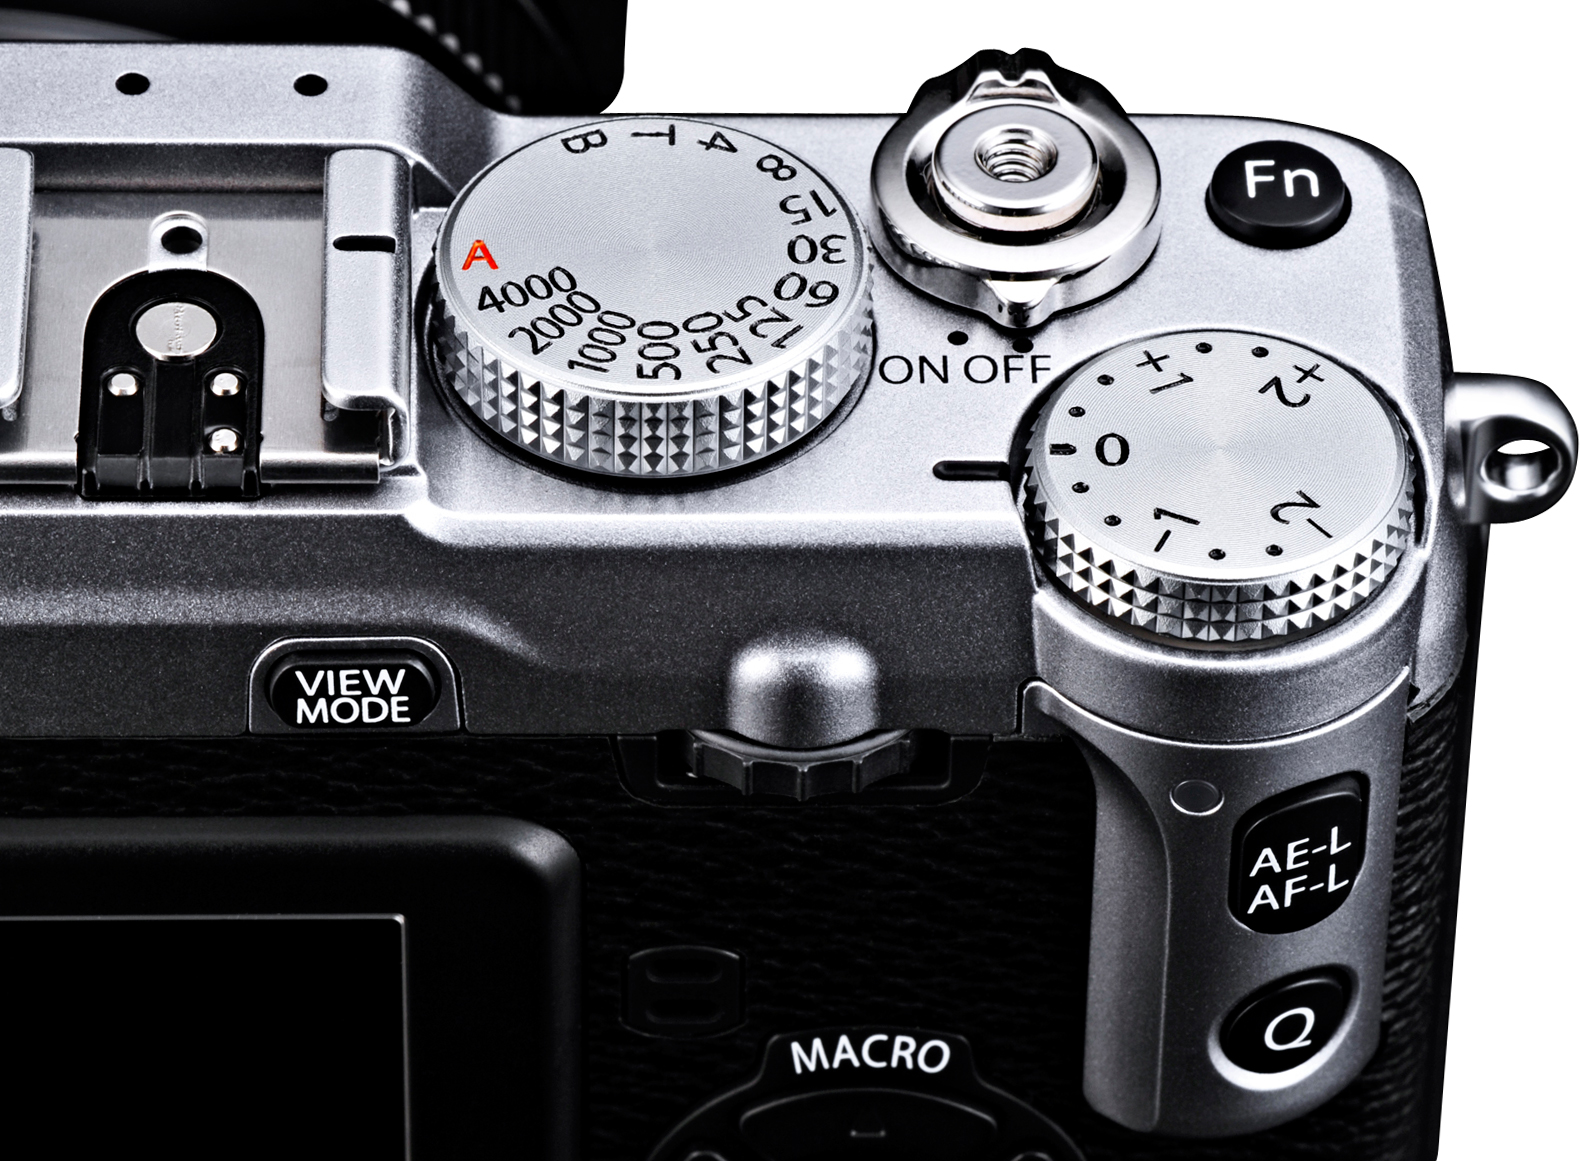 The New Fujifilm X-E1 and New Lenses - THOUGHT